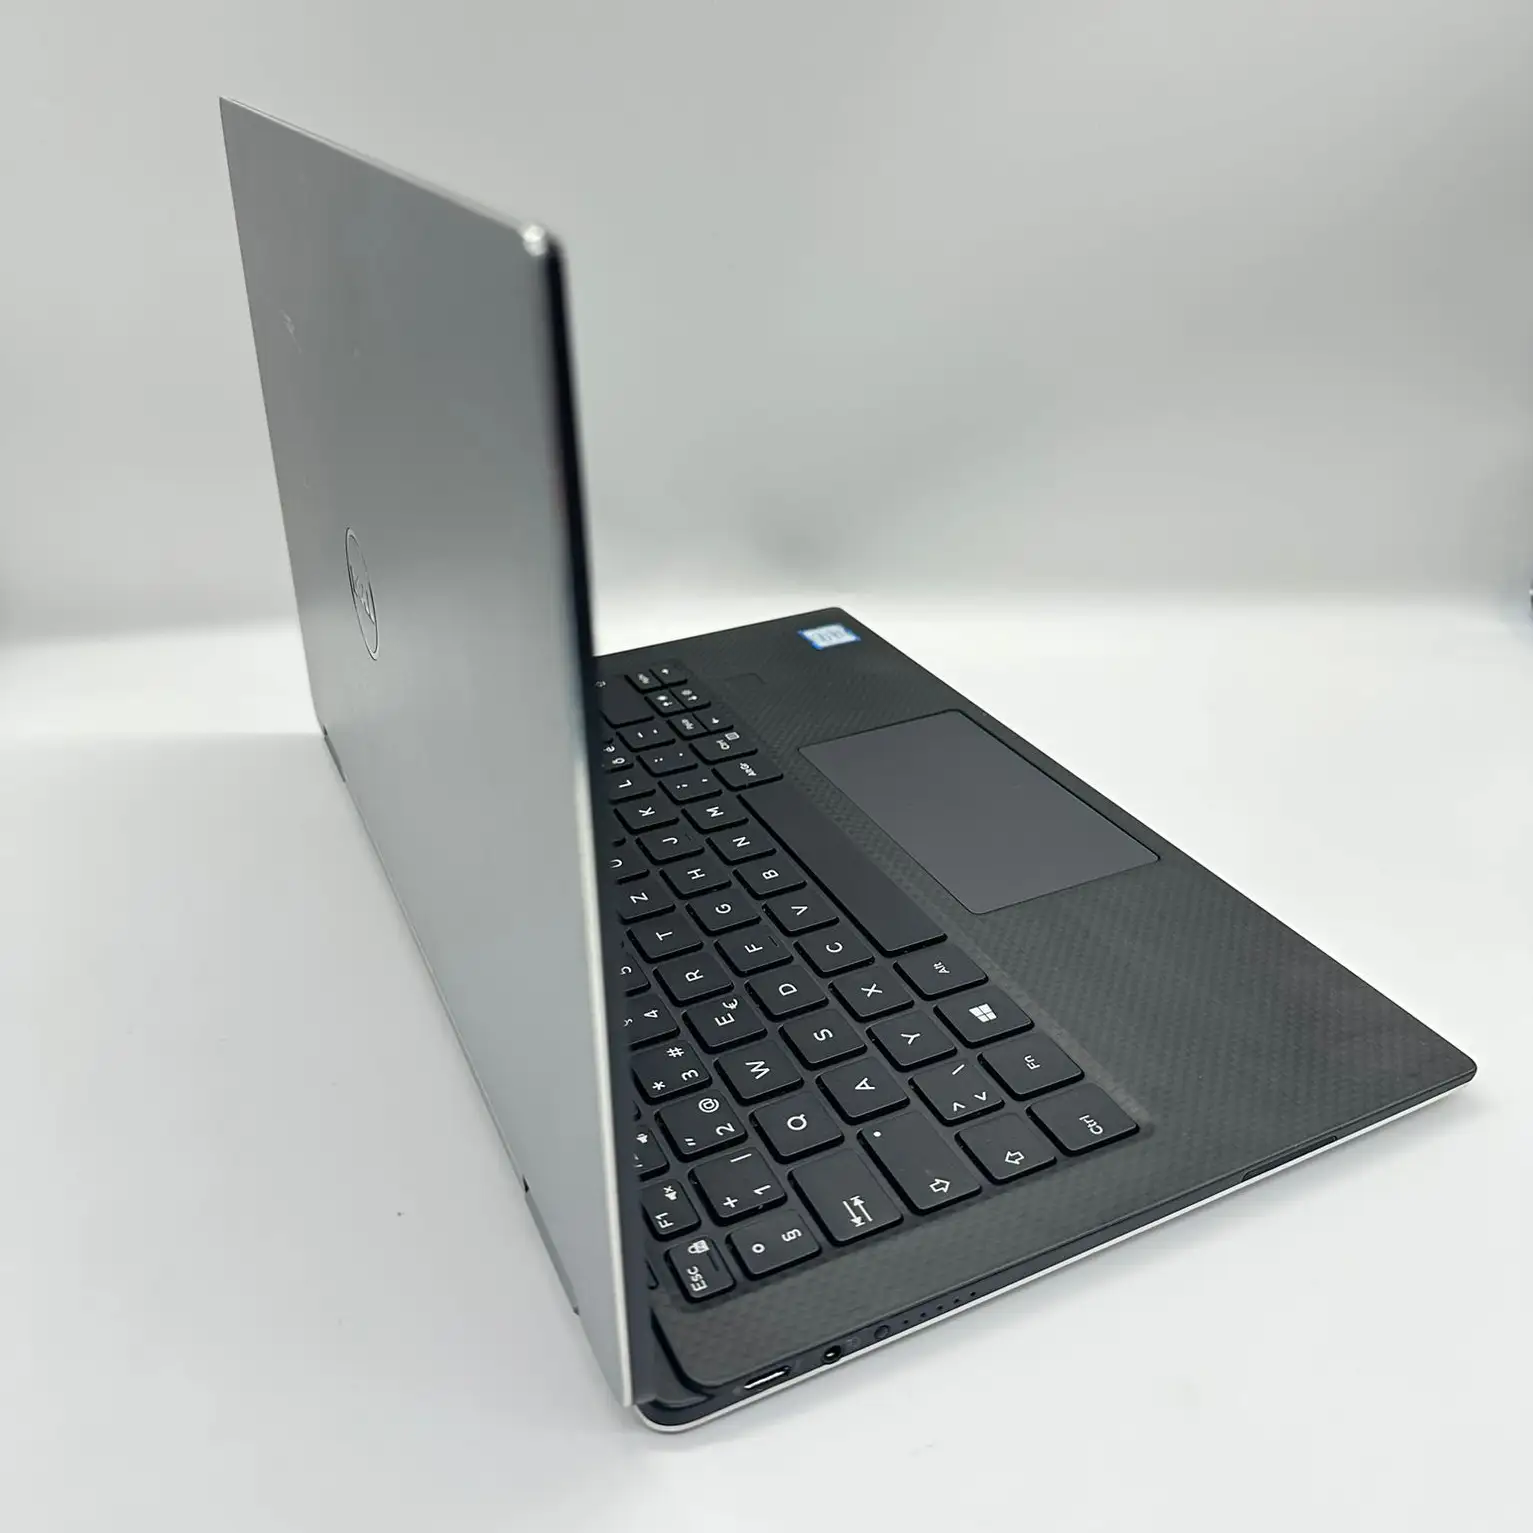 New Windows Dell XPS 13 2 in 1 (9365)  Fully Touchscreen 4K display Rotatable Ultra Thin Design